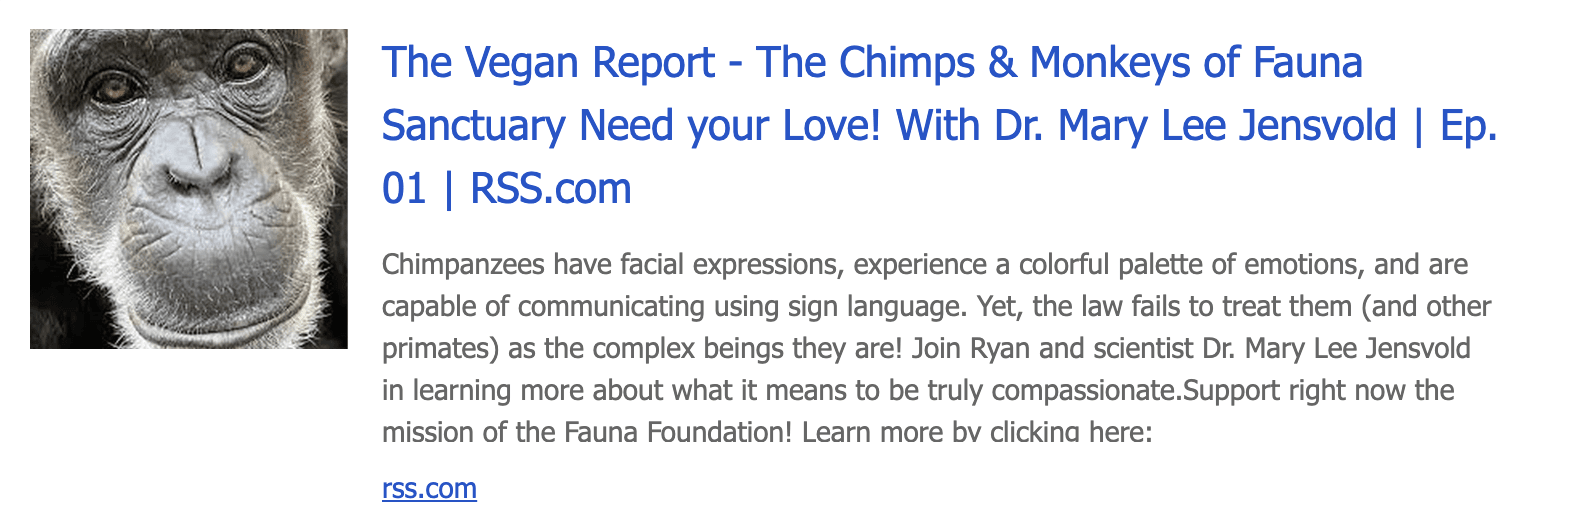 The Chimps & Monkeys of Fauna Sanctuary Need your Love!, The Vegan Report